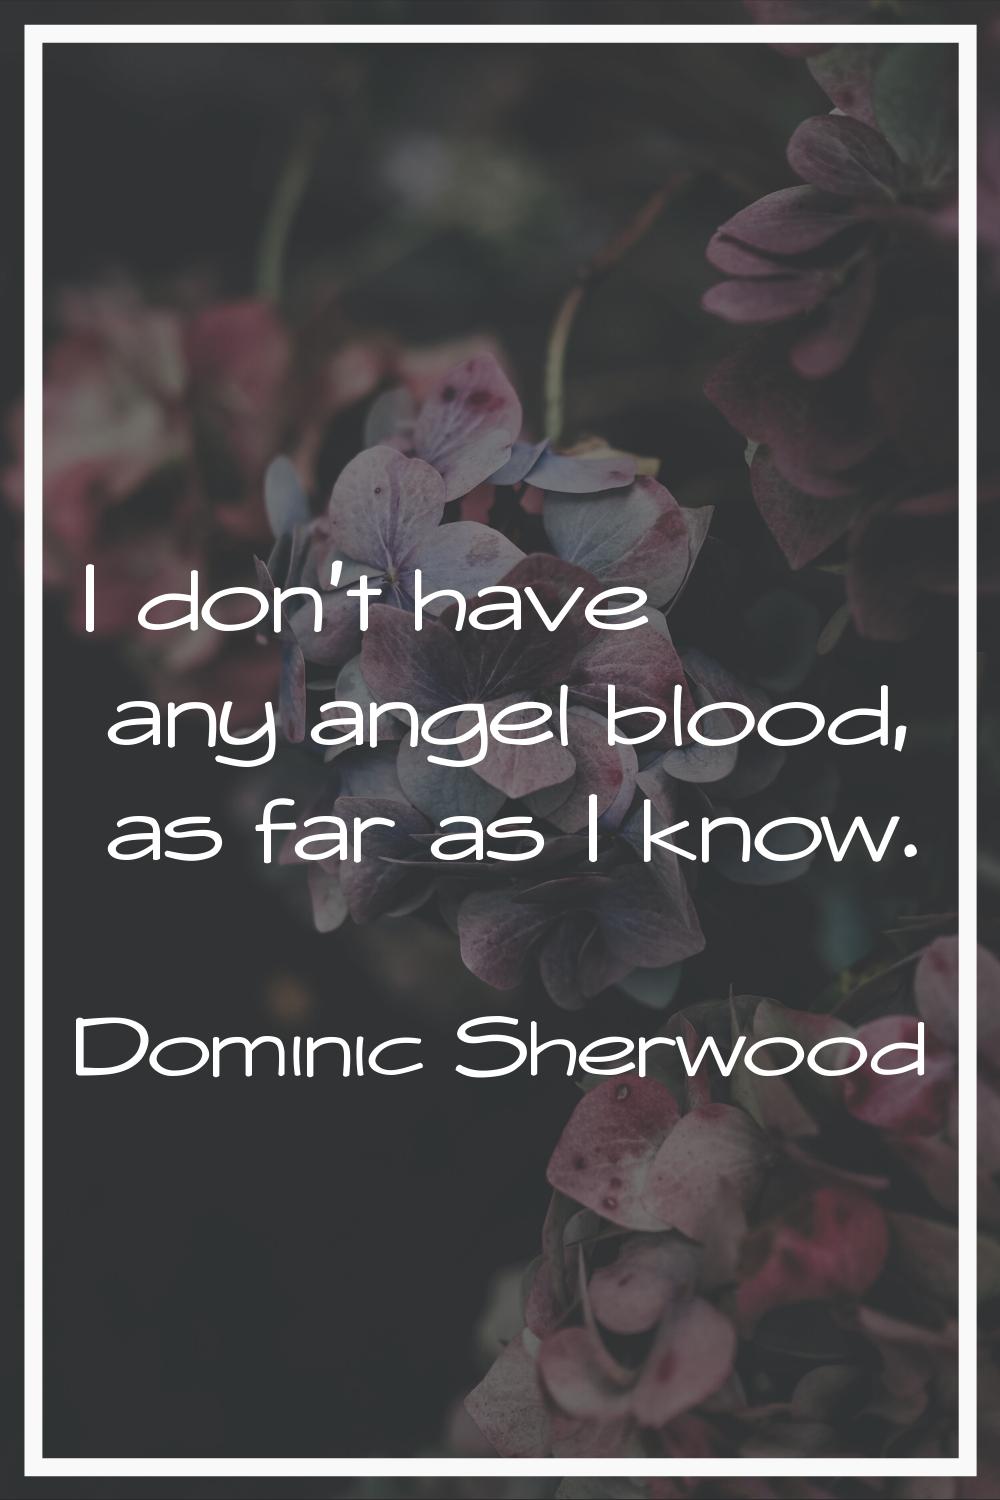 I don't have any angel blood, as far as I know.